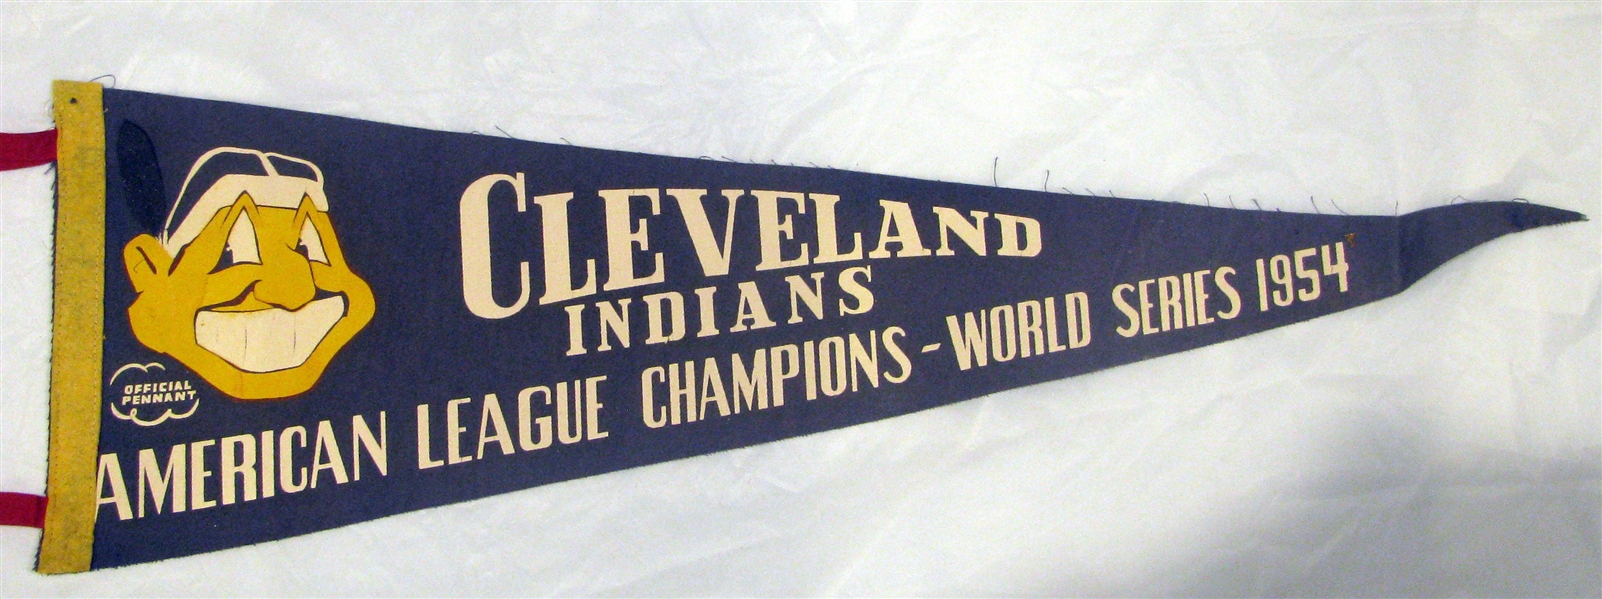 1954 CLEVELAND INDIANS WORLD SERIES' PENNANT